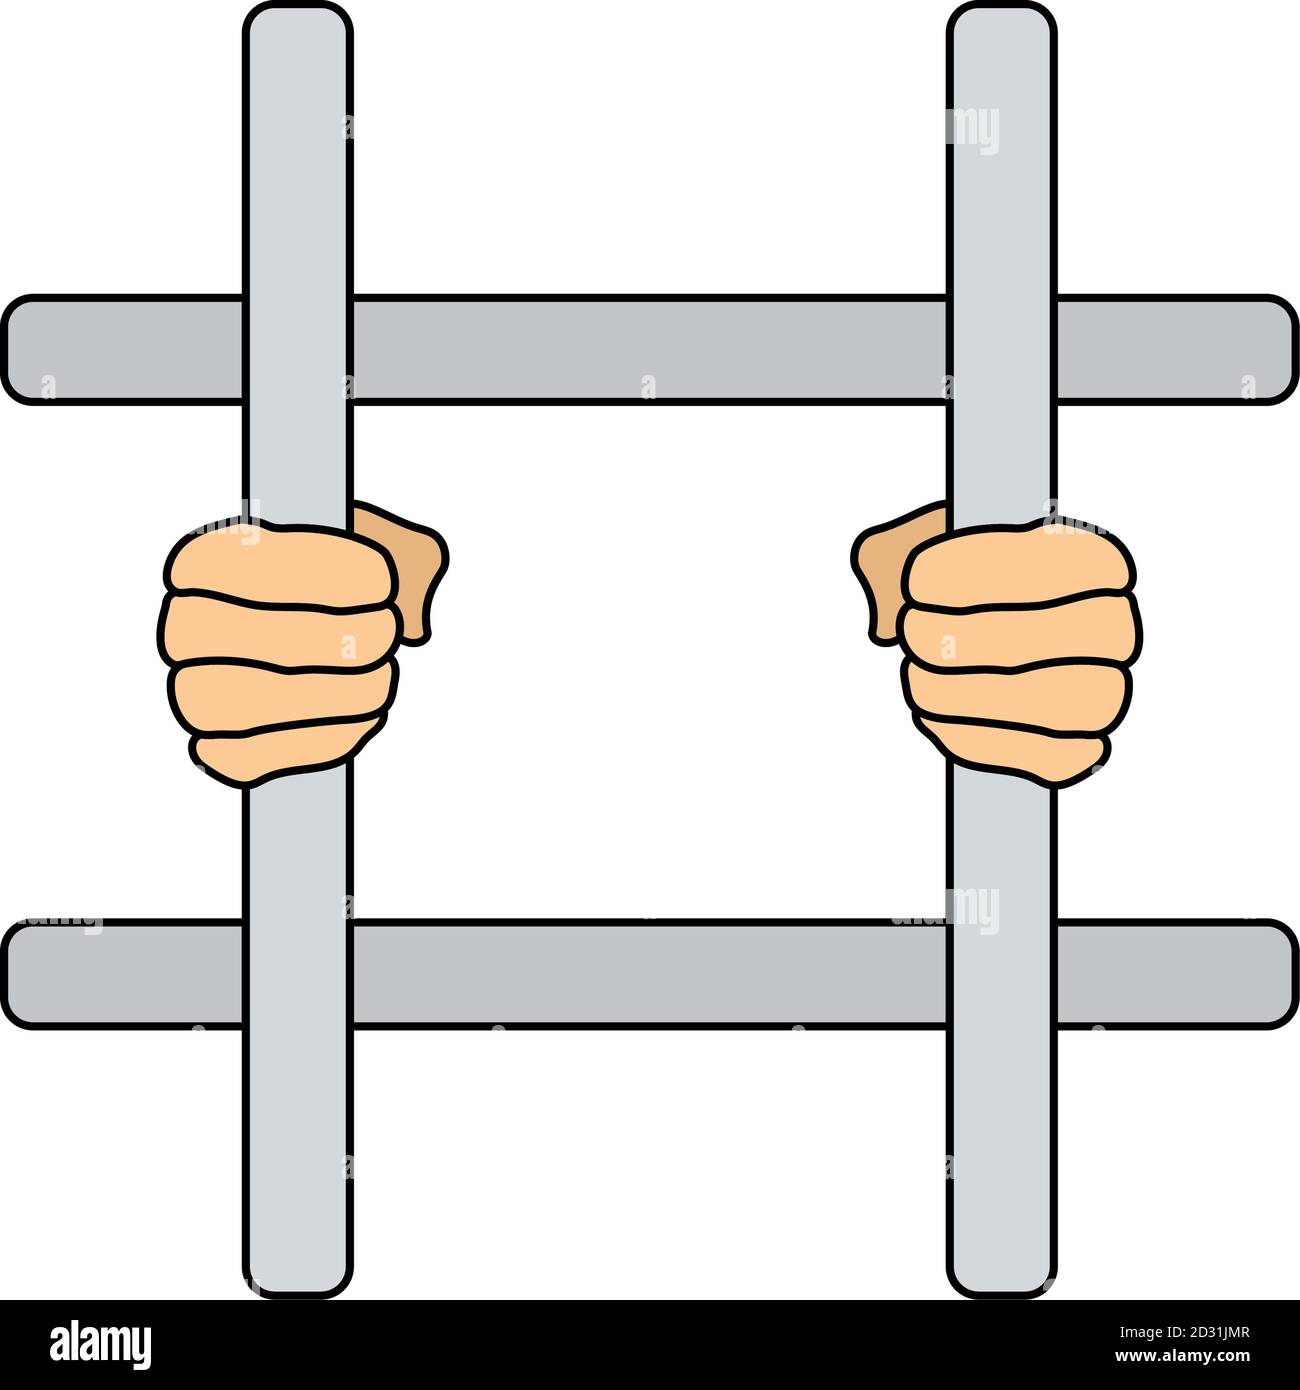 Hands Holding Prison Bars Icon. Editable Outline With Color Fill Design. Vector Illustration. Stock Vector